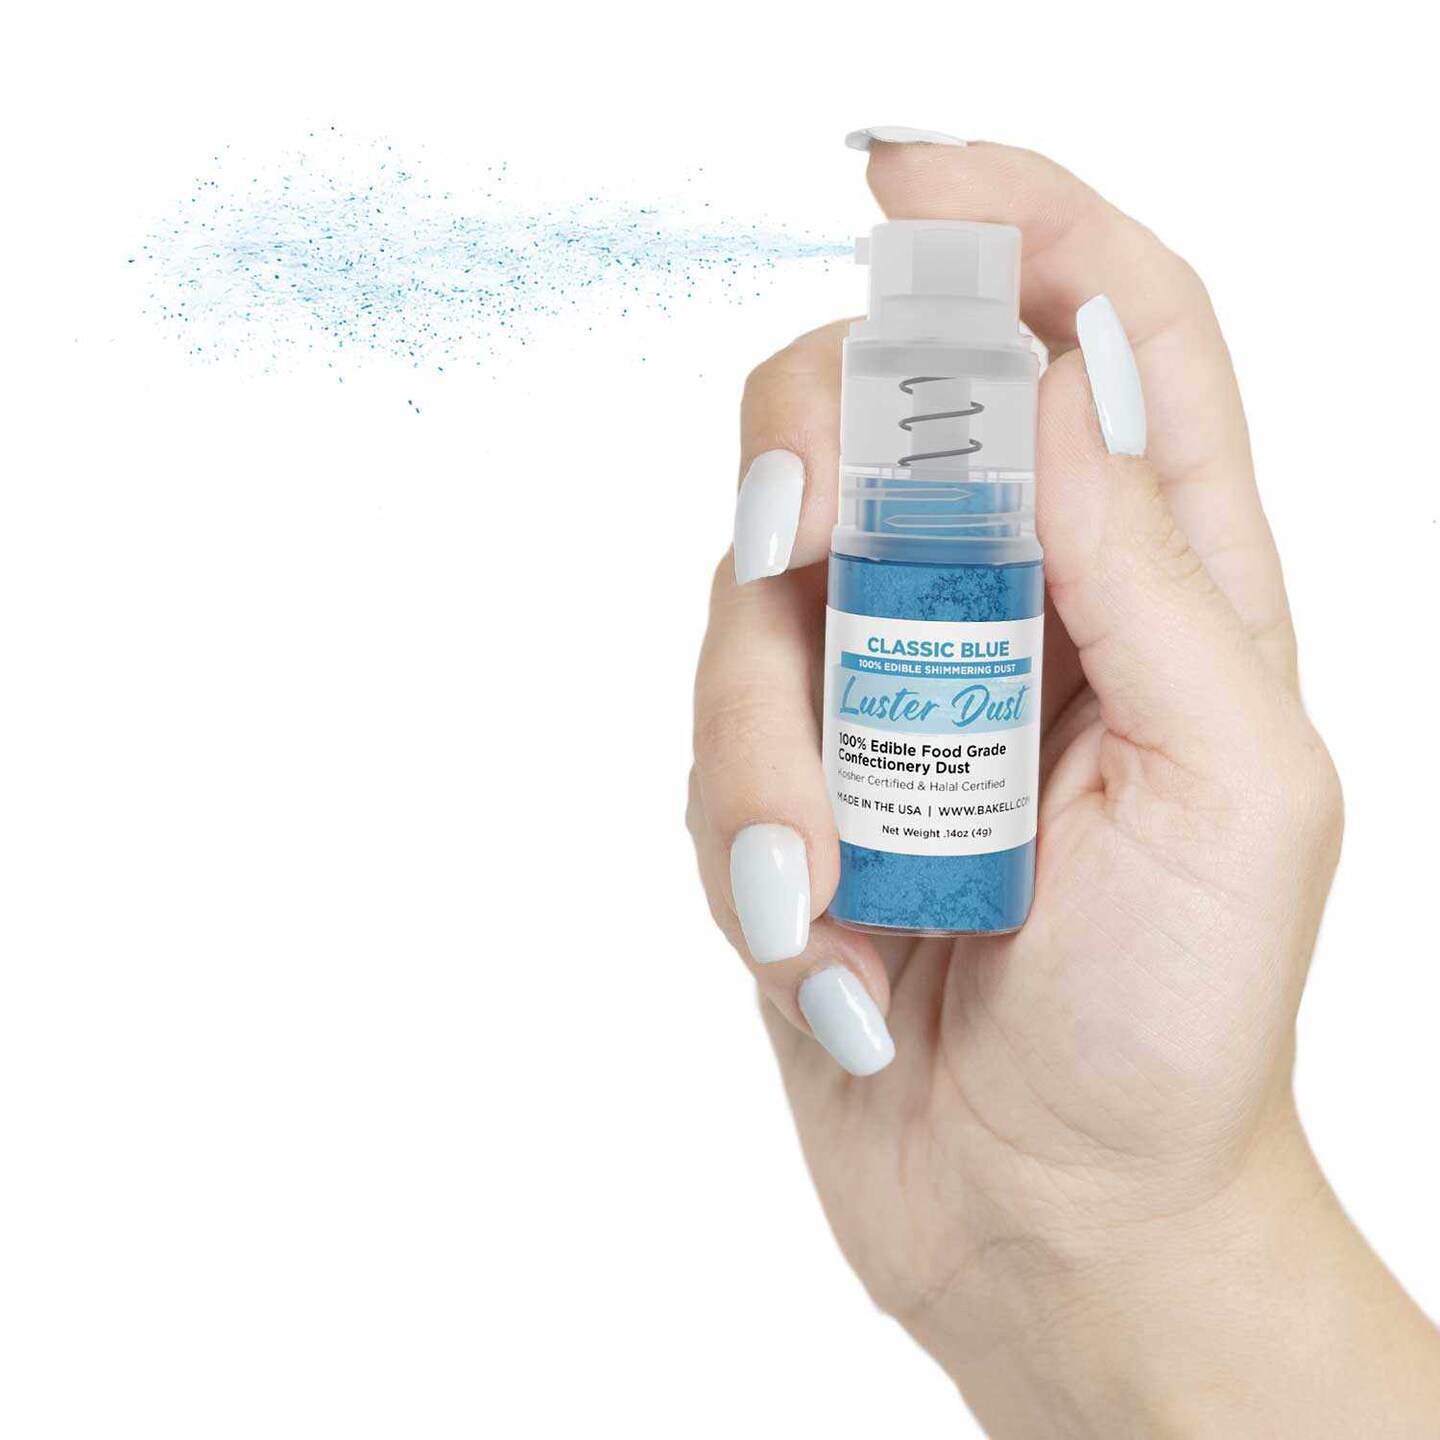 Classic Blue Luster Dust Spray | Luster Dust Edible Glitter Spray Dust for Cakes, Cookies, Desserts, Paint. FDA Compliant (4 Gram Pump)